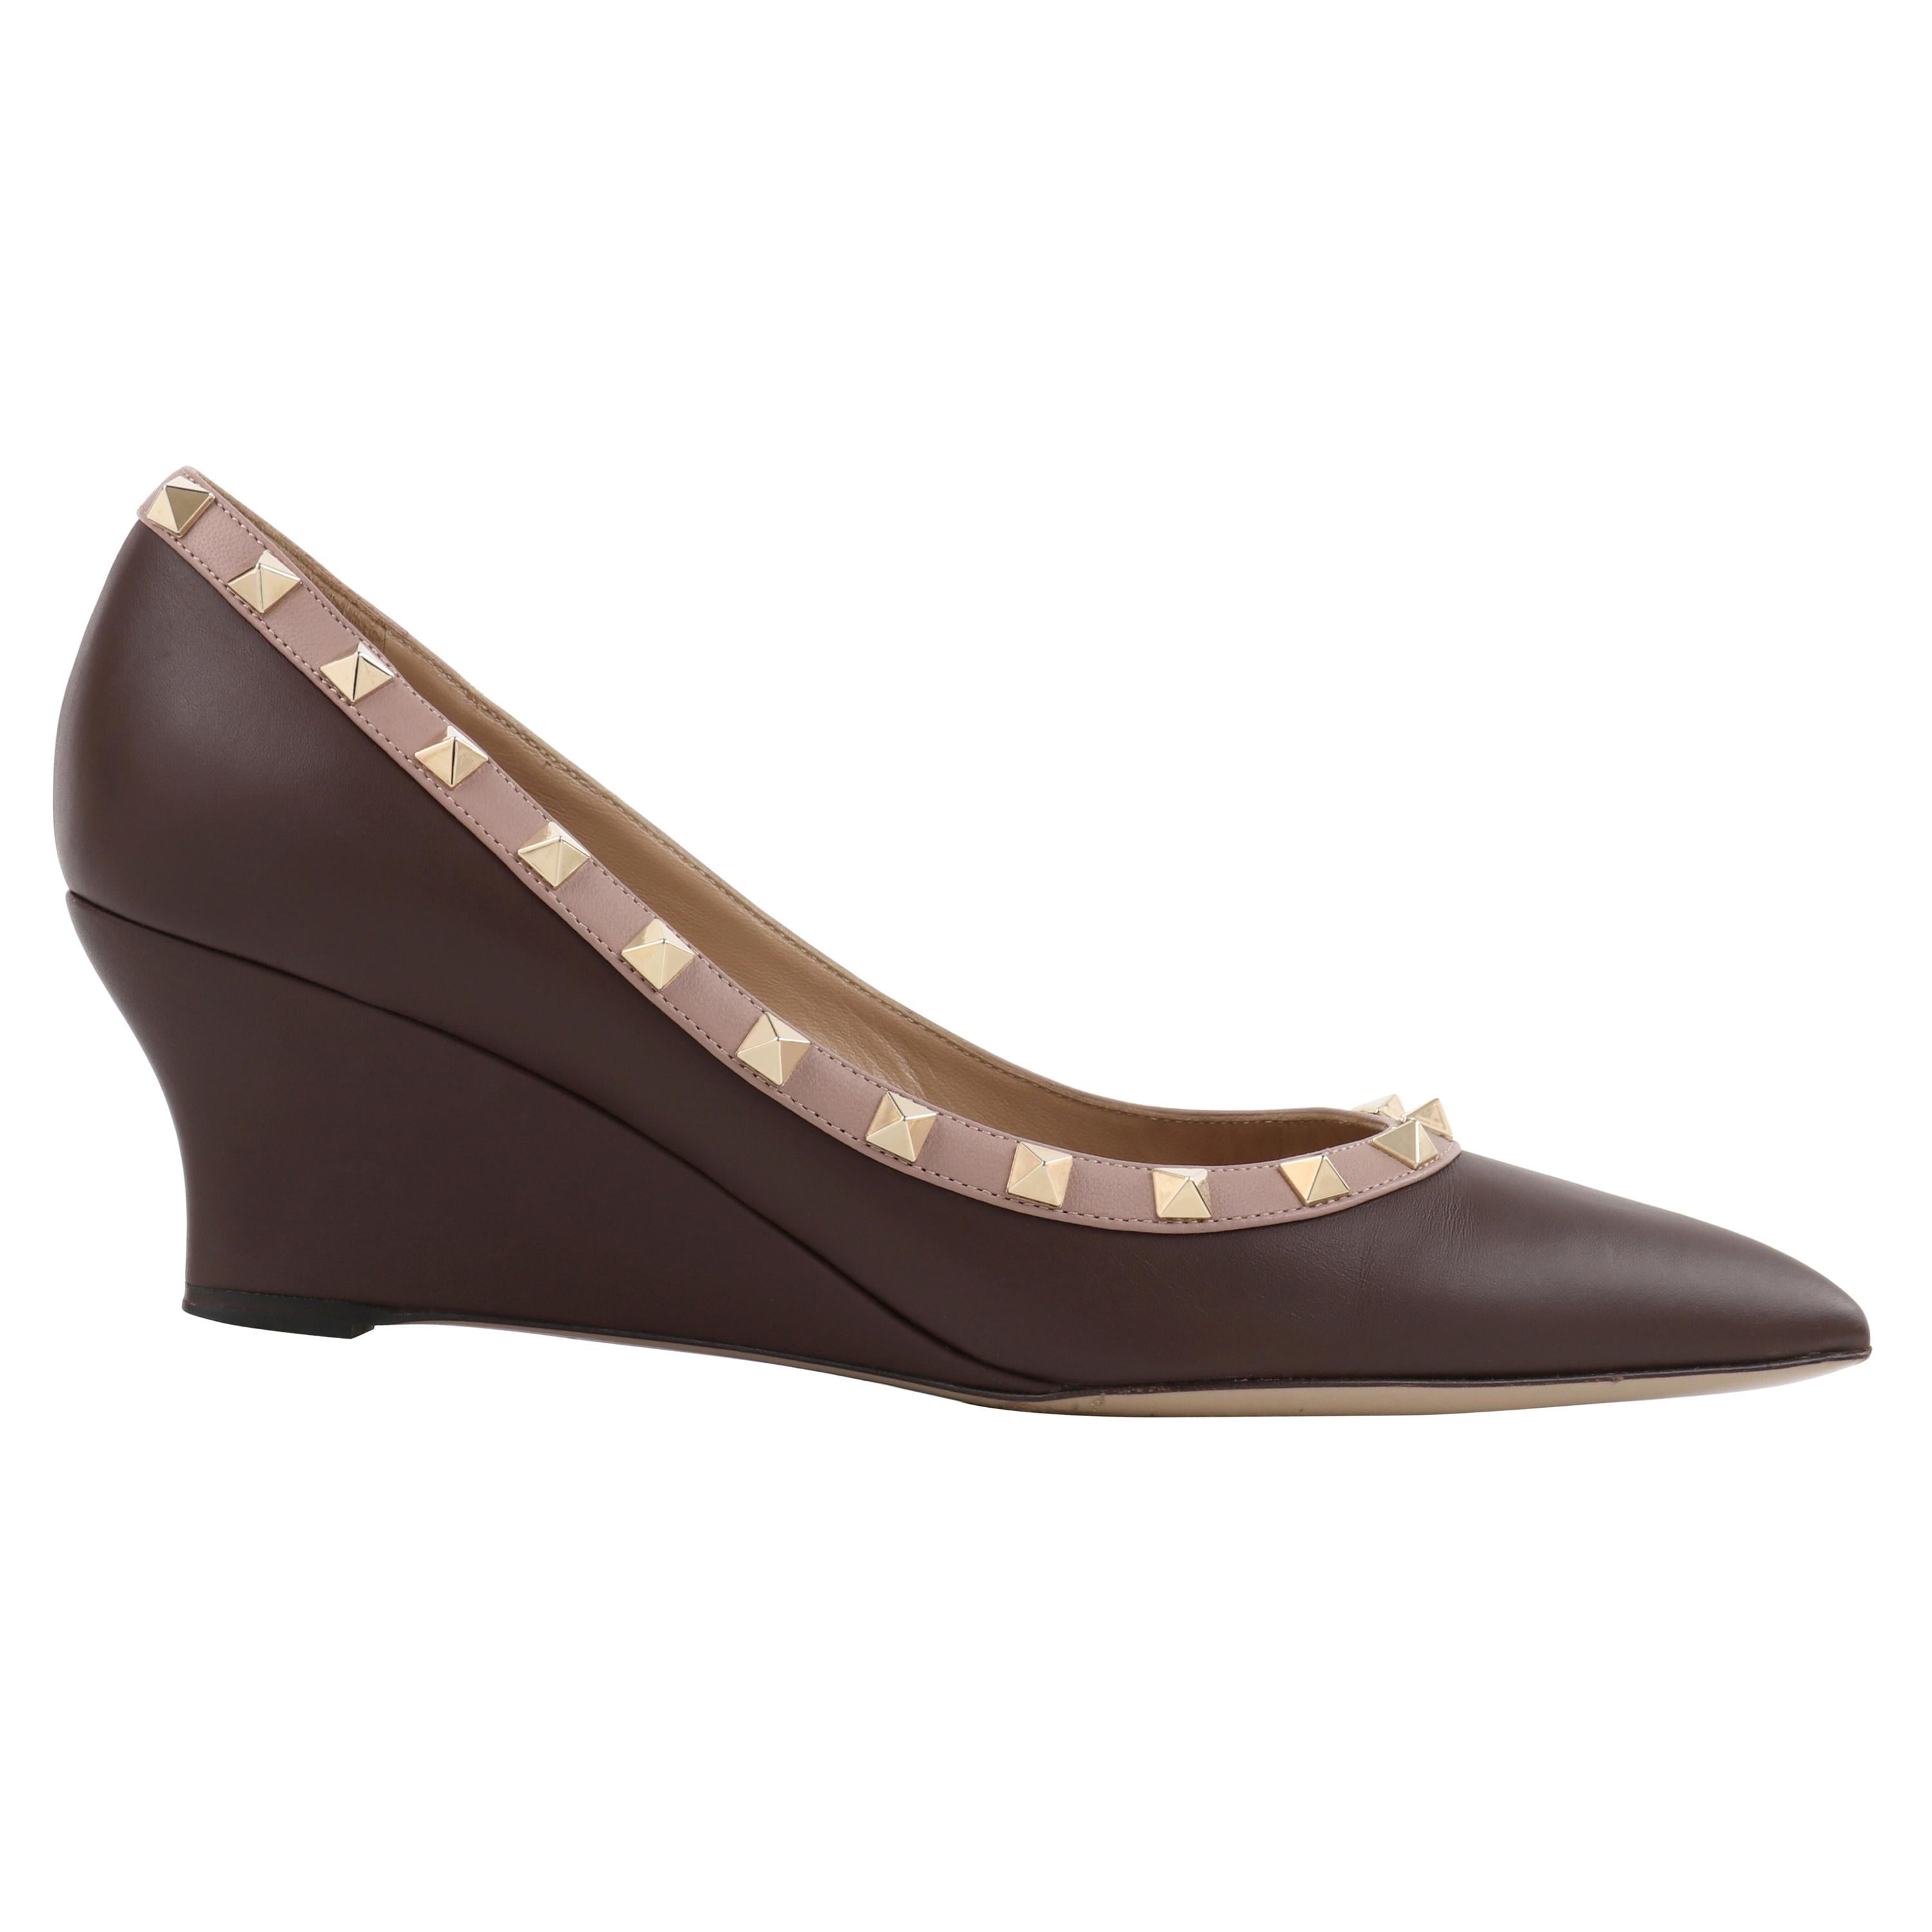 VALENTINO "Rockstud" Cacao Brown Napa Leather Studded Pointed Toe Wedge Heels